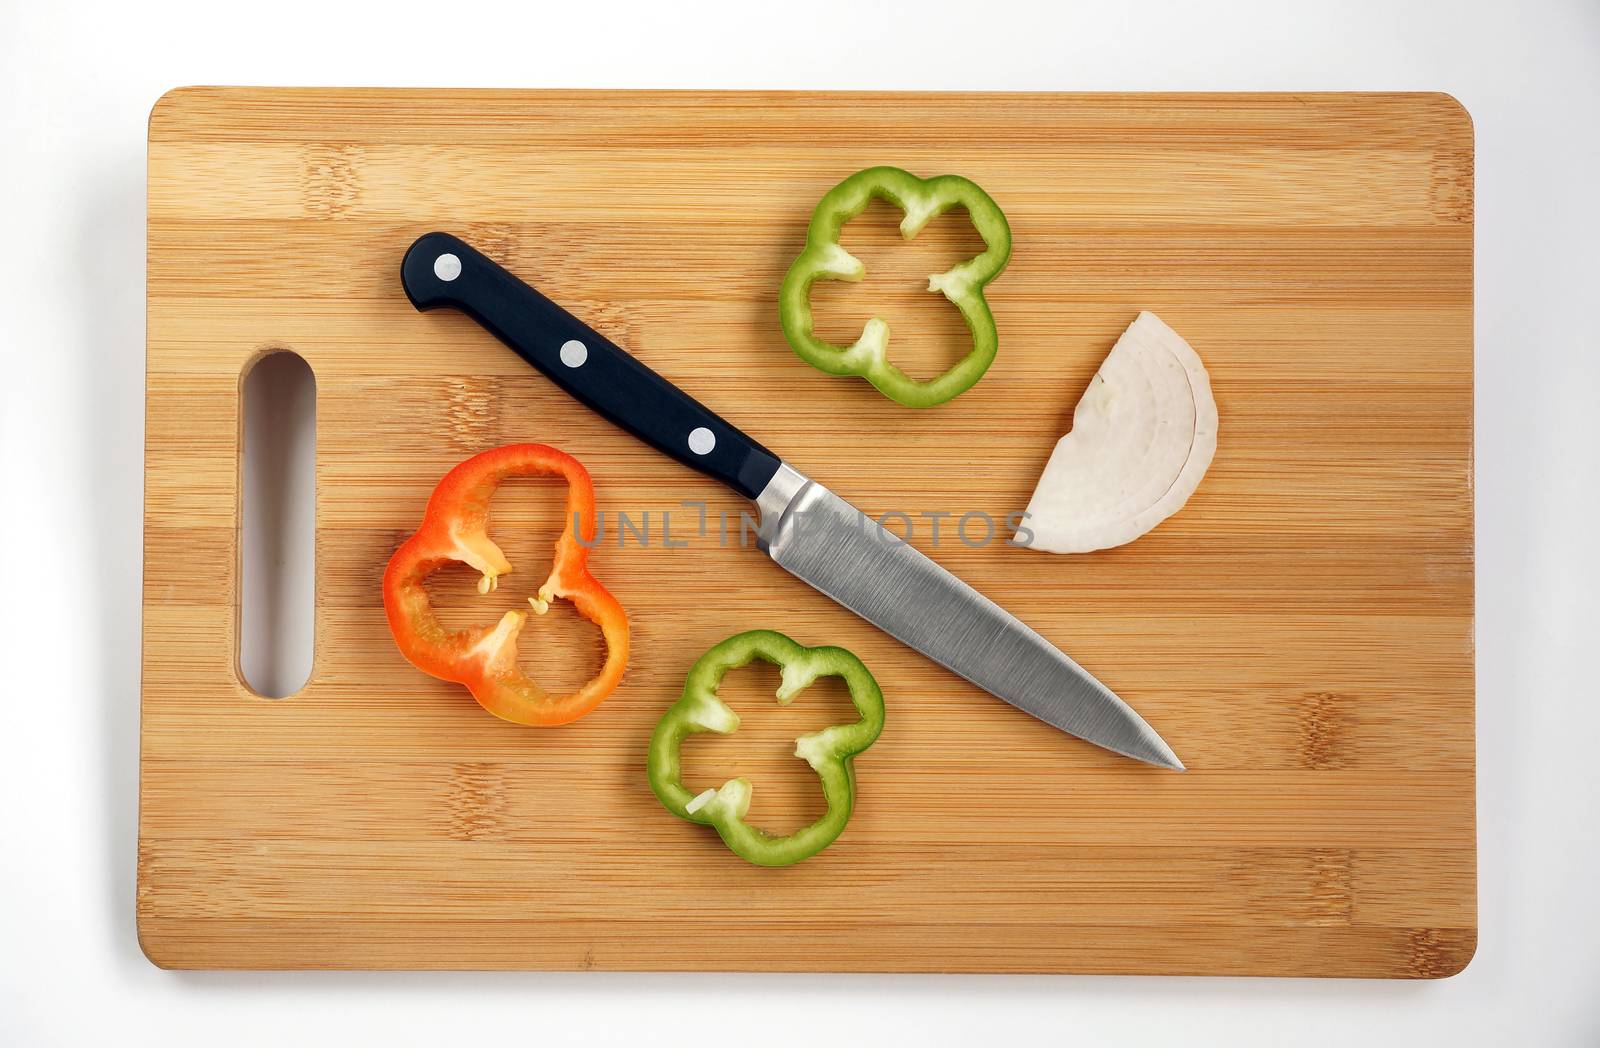 Small utility knife for a jobbing on a chopping board